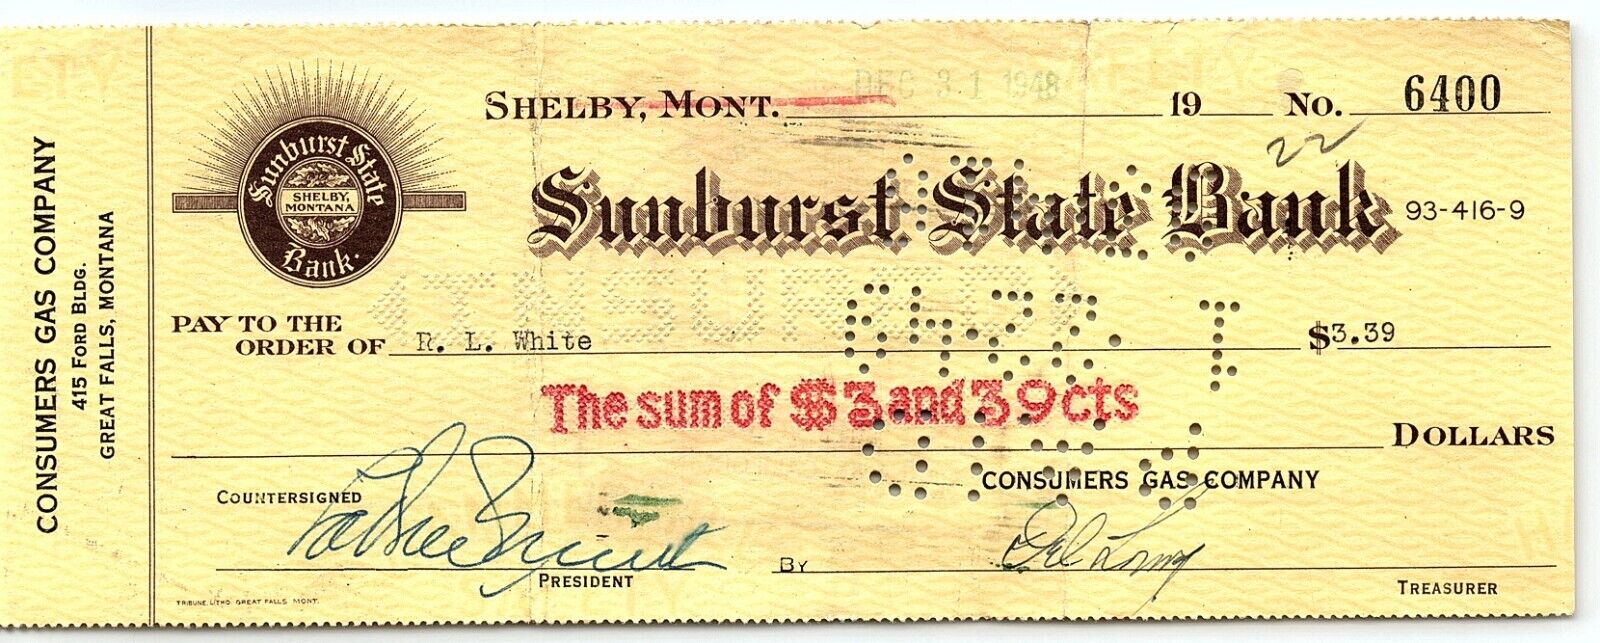 1948 SHELBY MONTANA SUNBURST STATE BANK COMSUMERS GAS CO GREAT FALLS CHECK Z1644